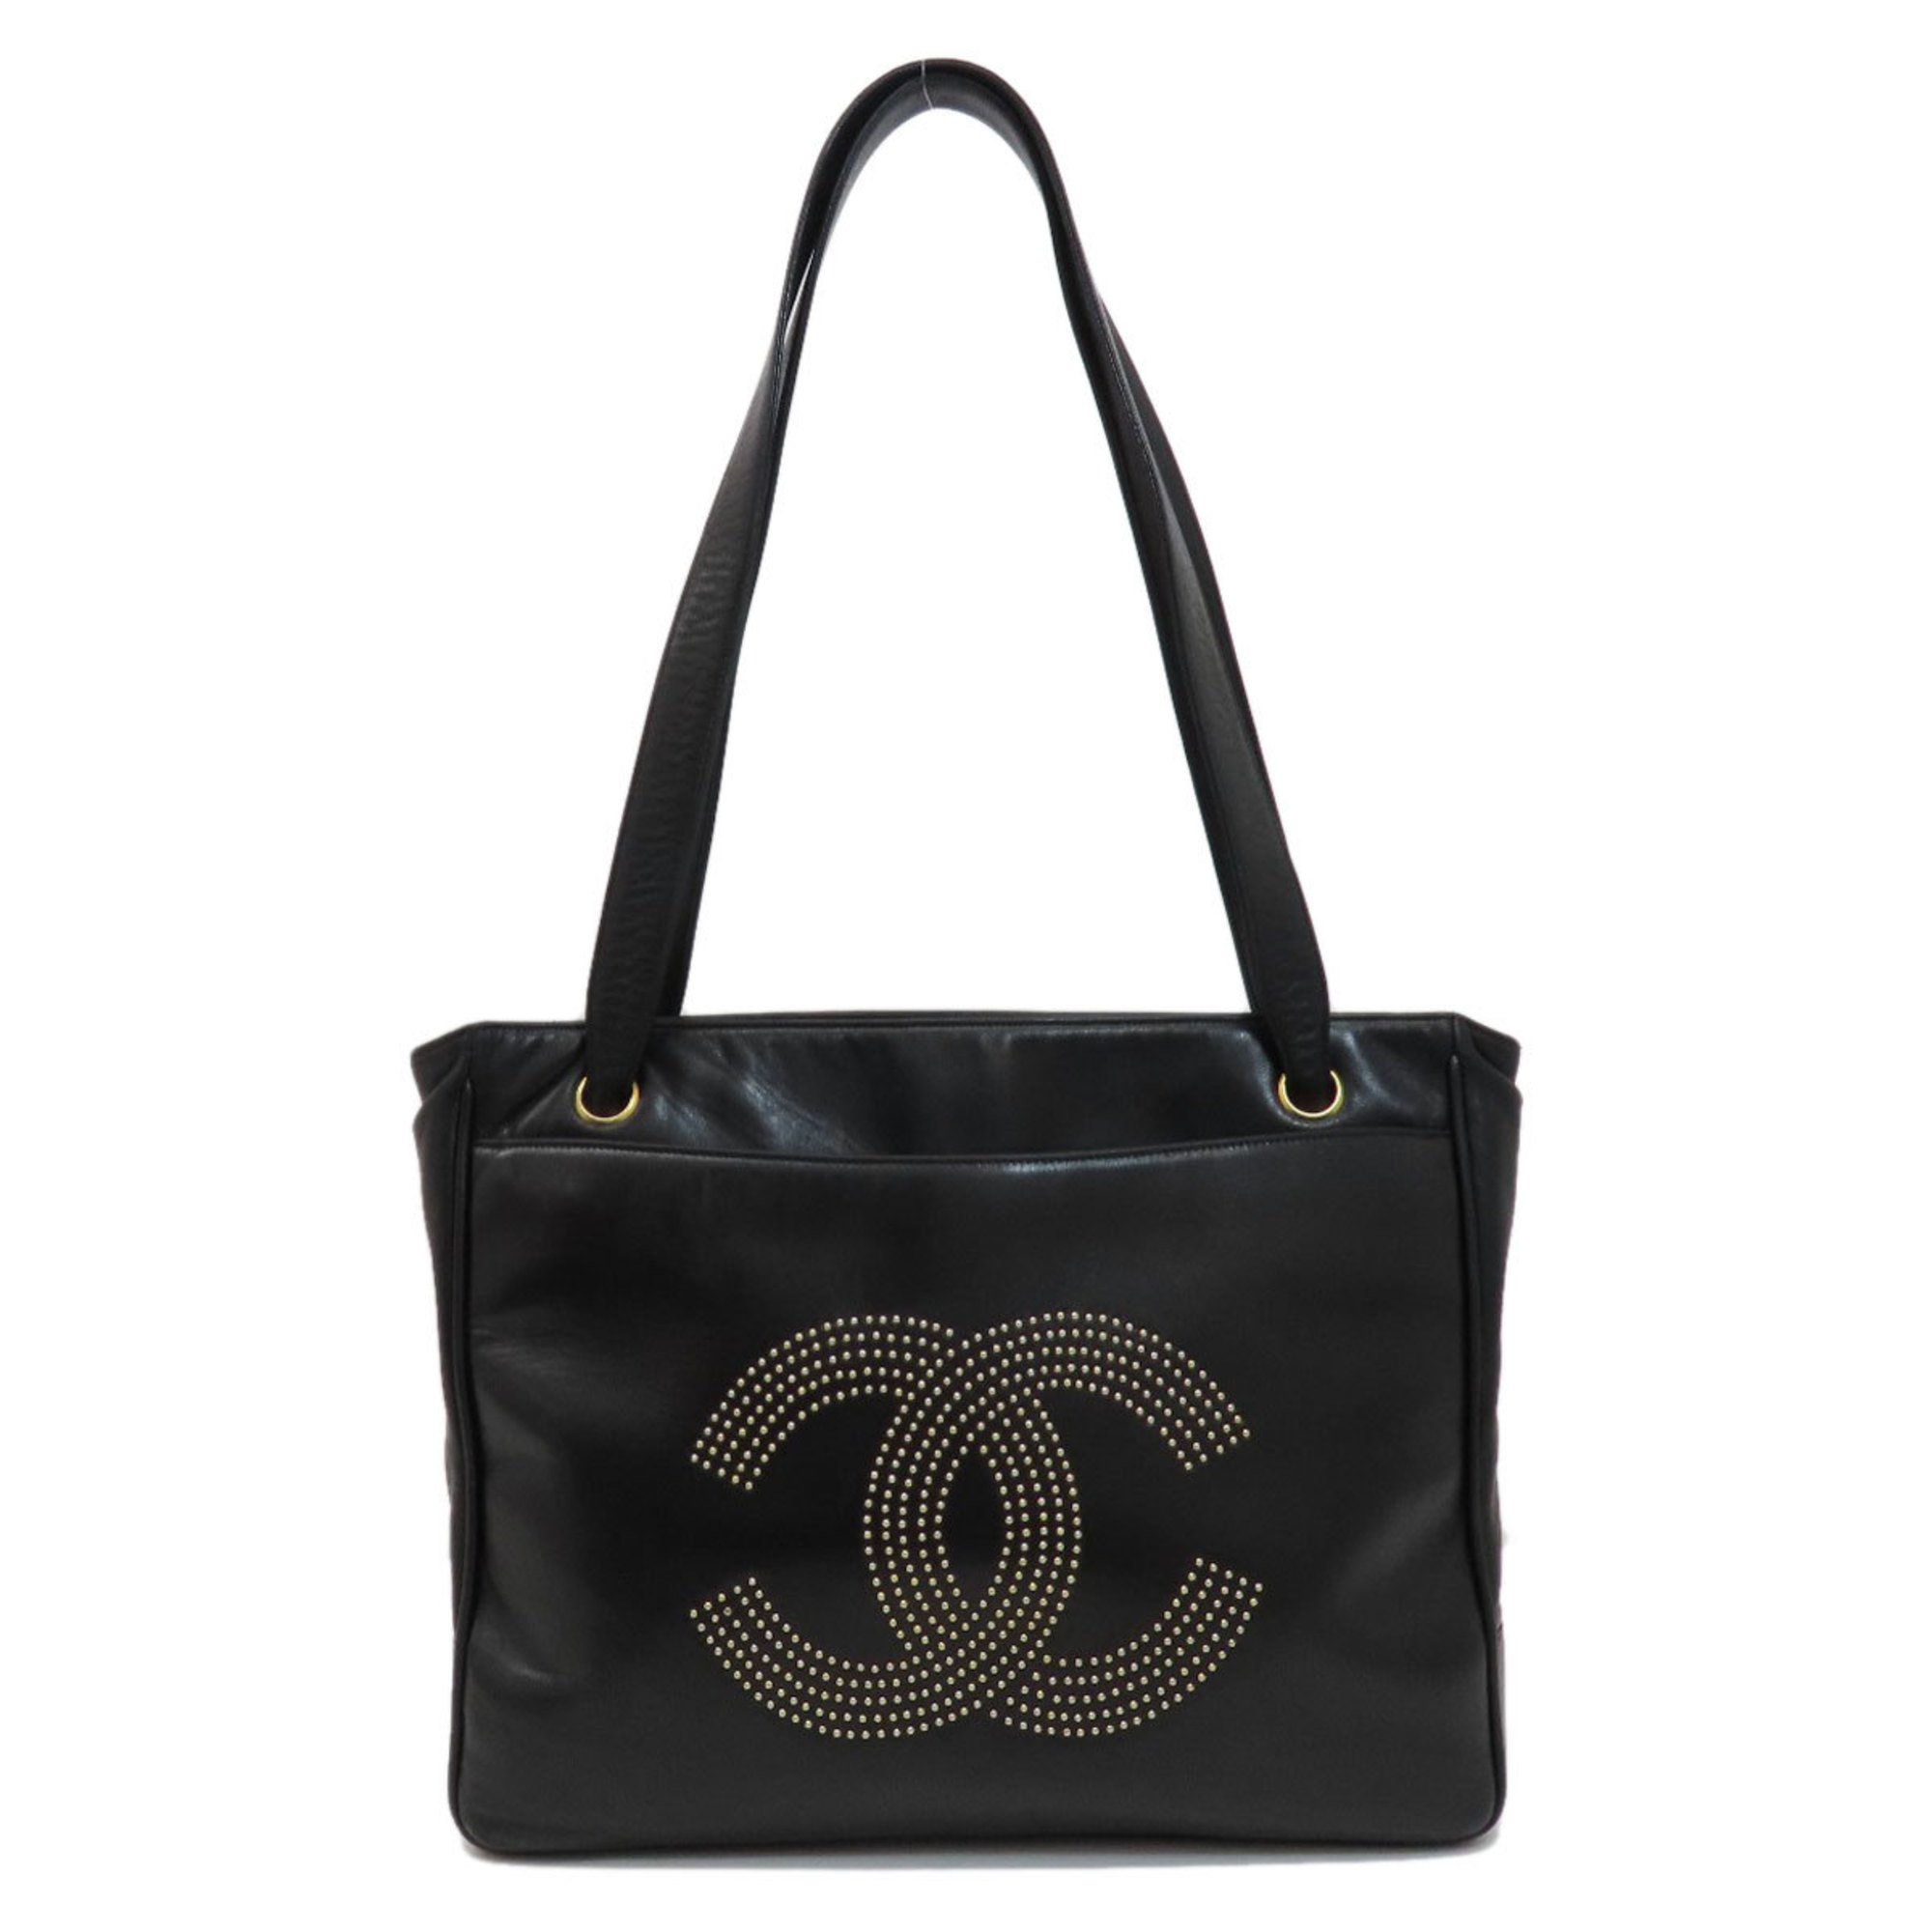 Chanel Coco Mark Studded Tote Bag Lambskin Women's